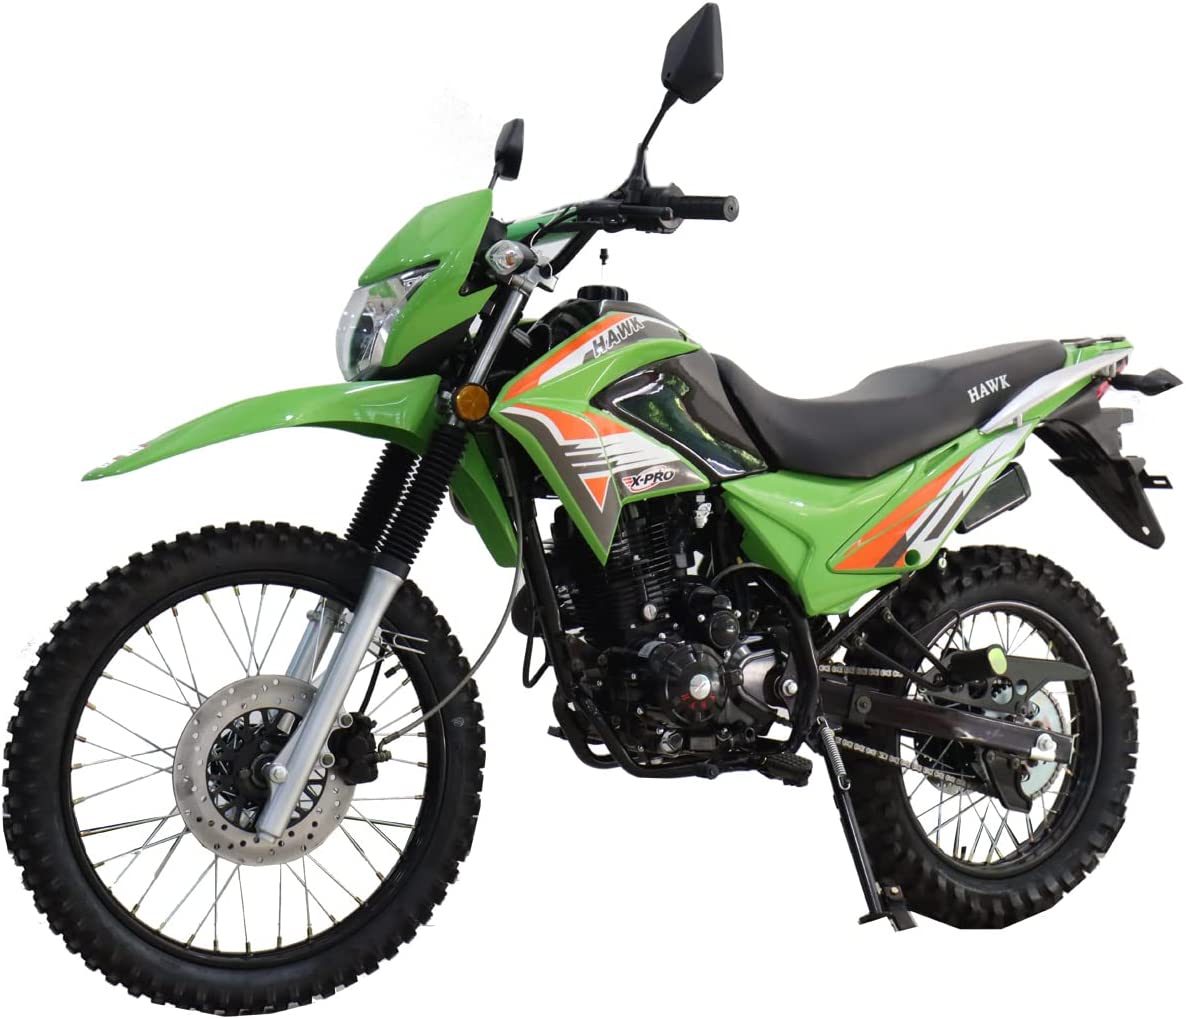 Did You Know Amazon Sells Cheap Dirt Bikes? The Drive